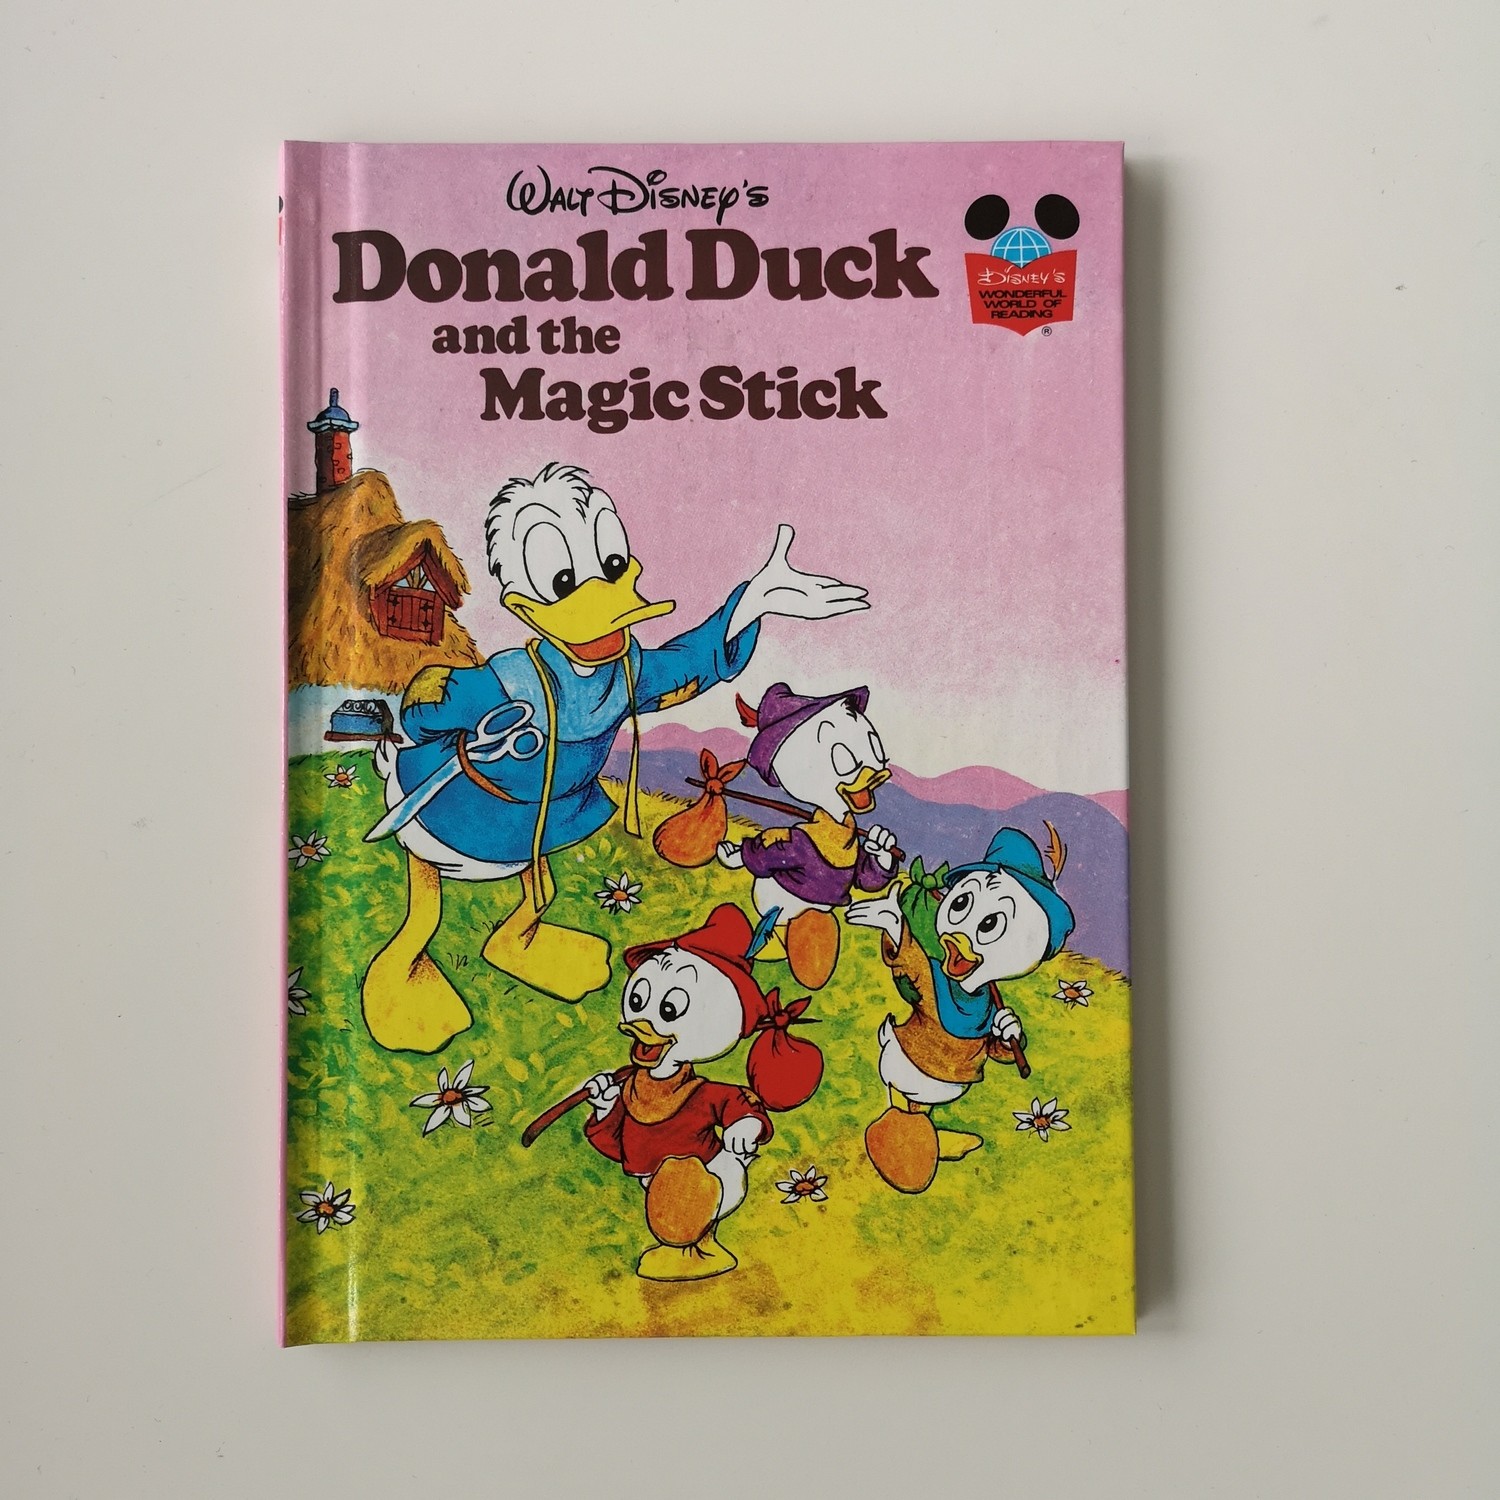 Donald Duck and his Magic Stick